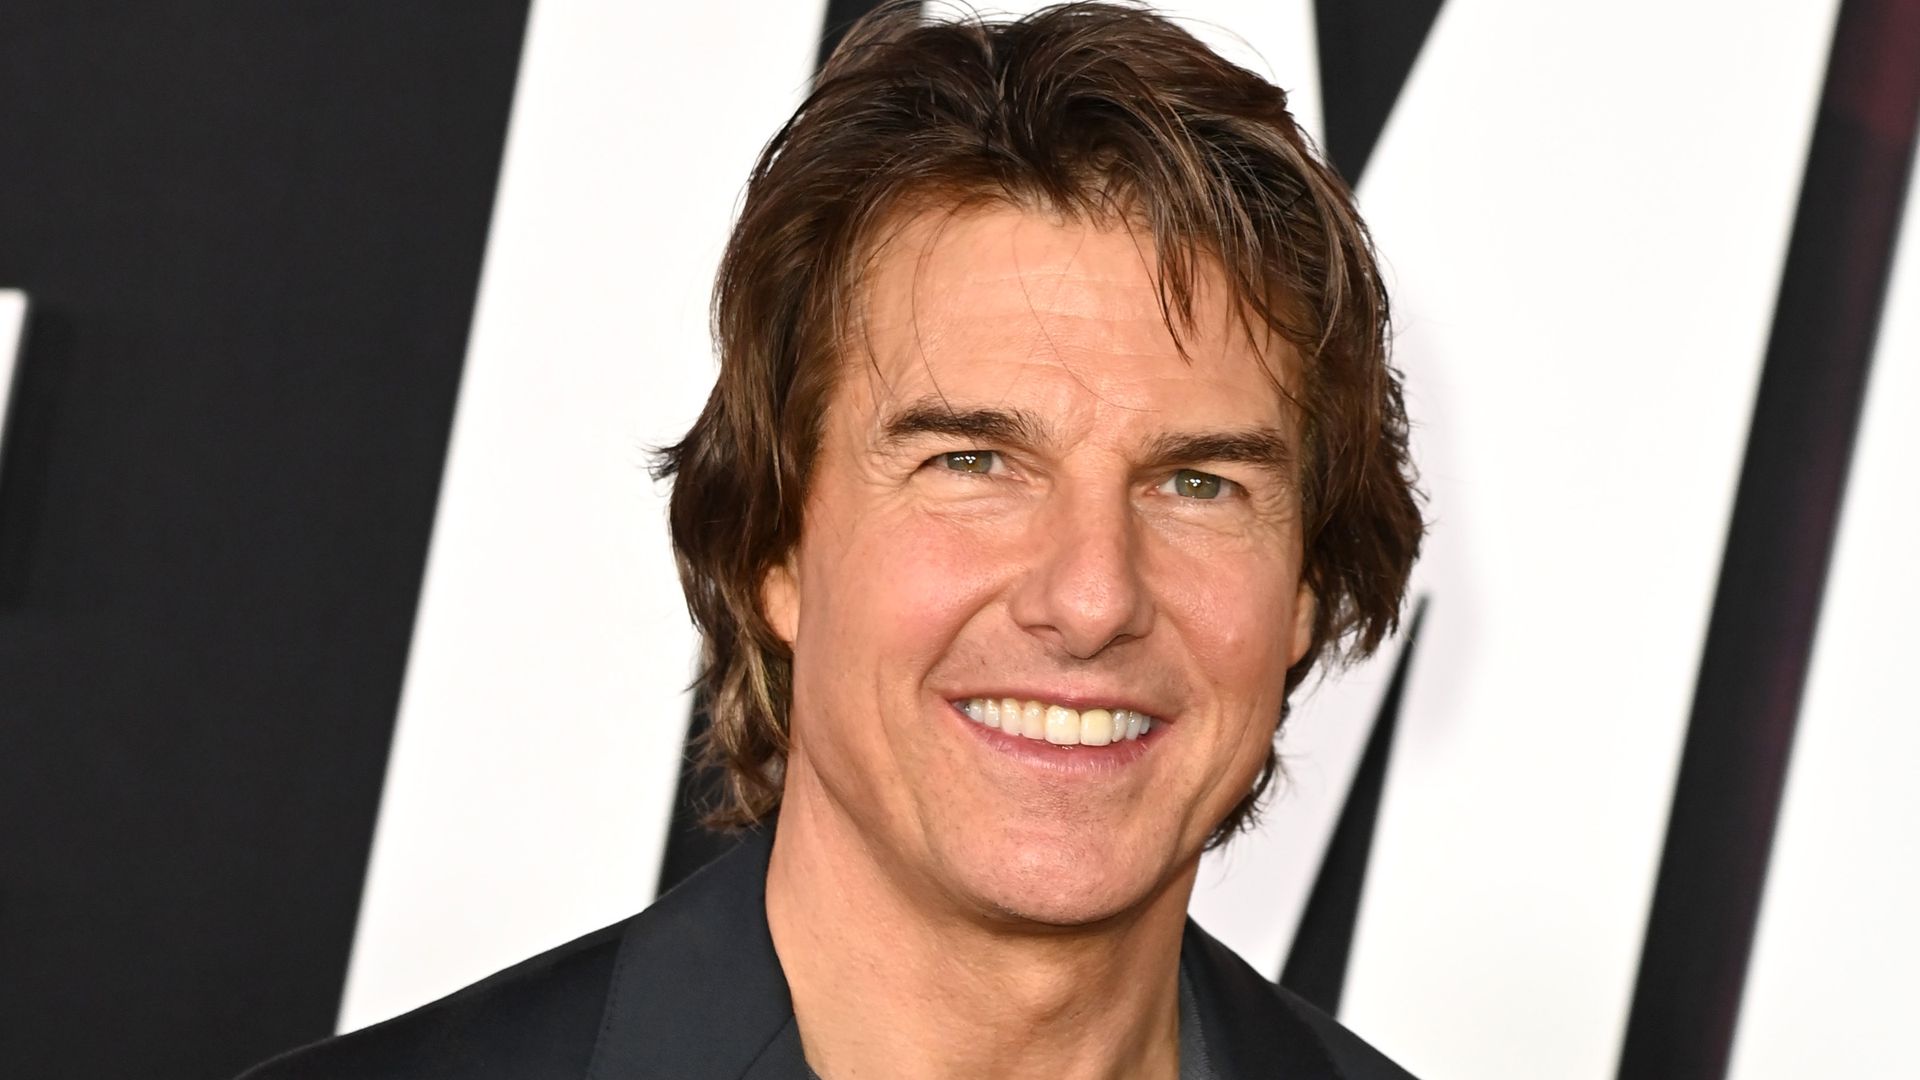 Tom Cruise attends the US Premiere of "Mission: Impossible - Dead Reckoning Part One" in New York